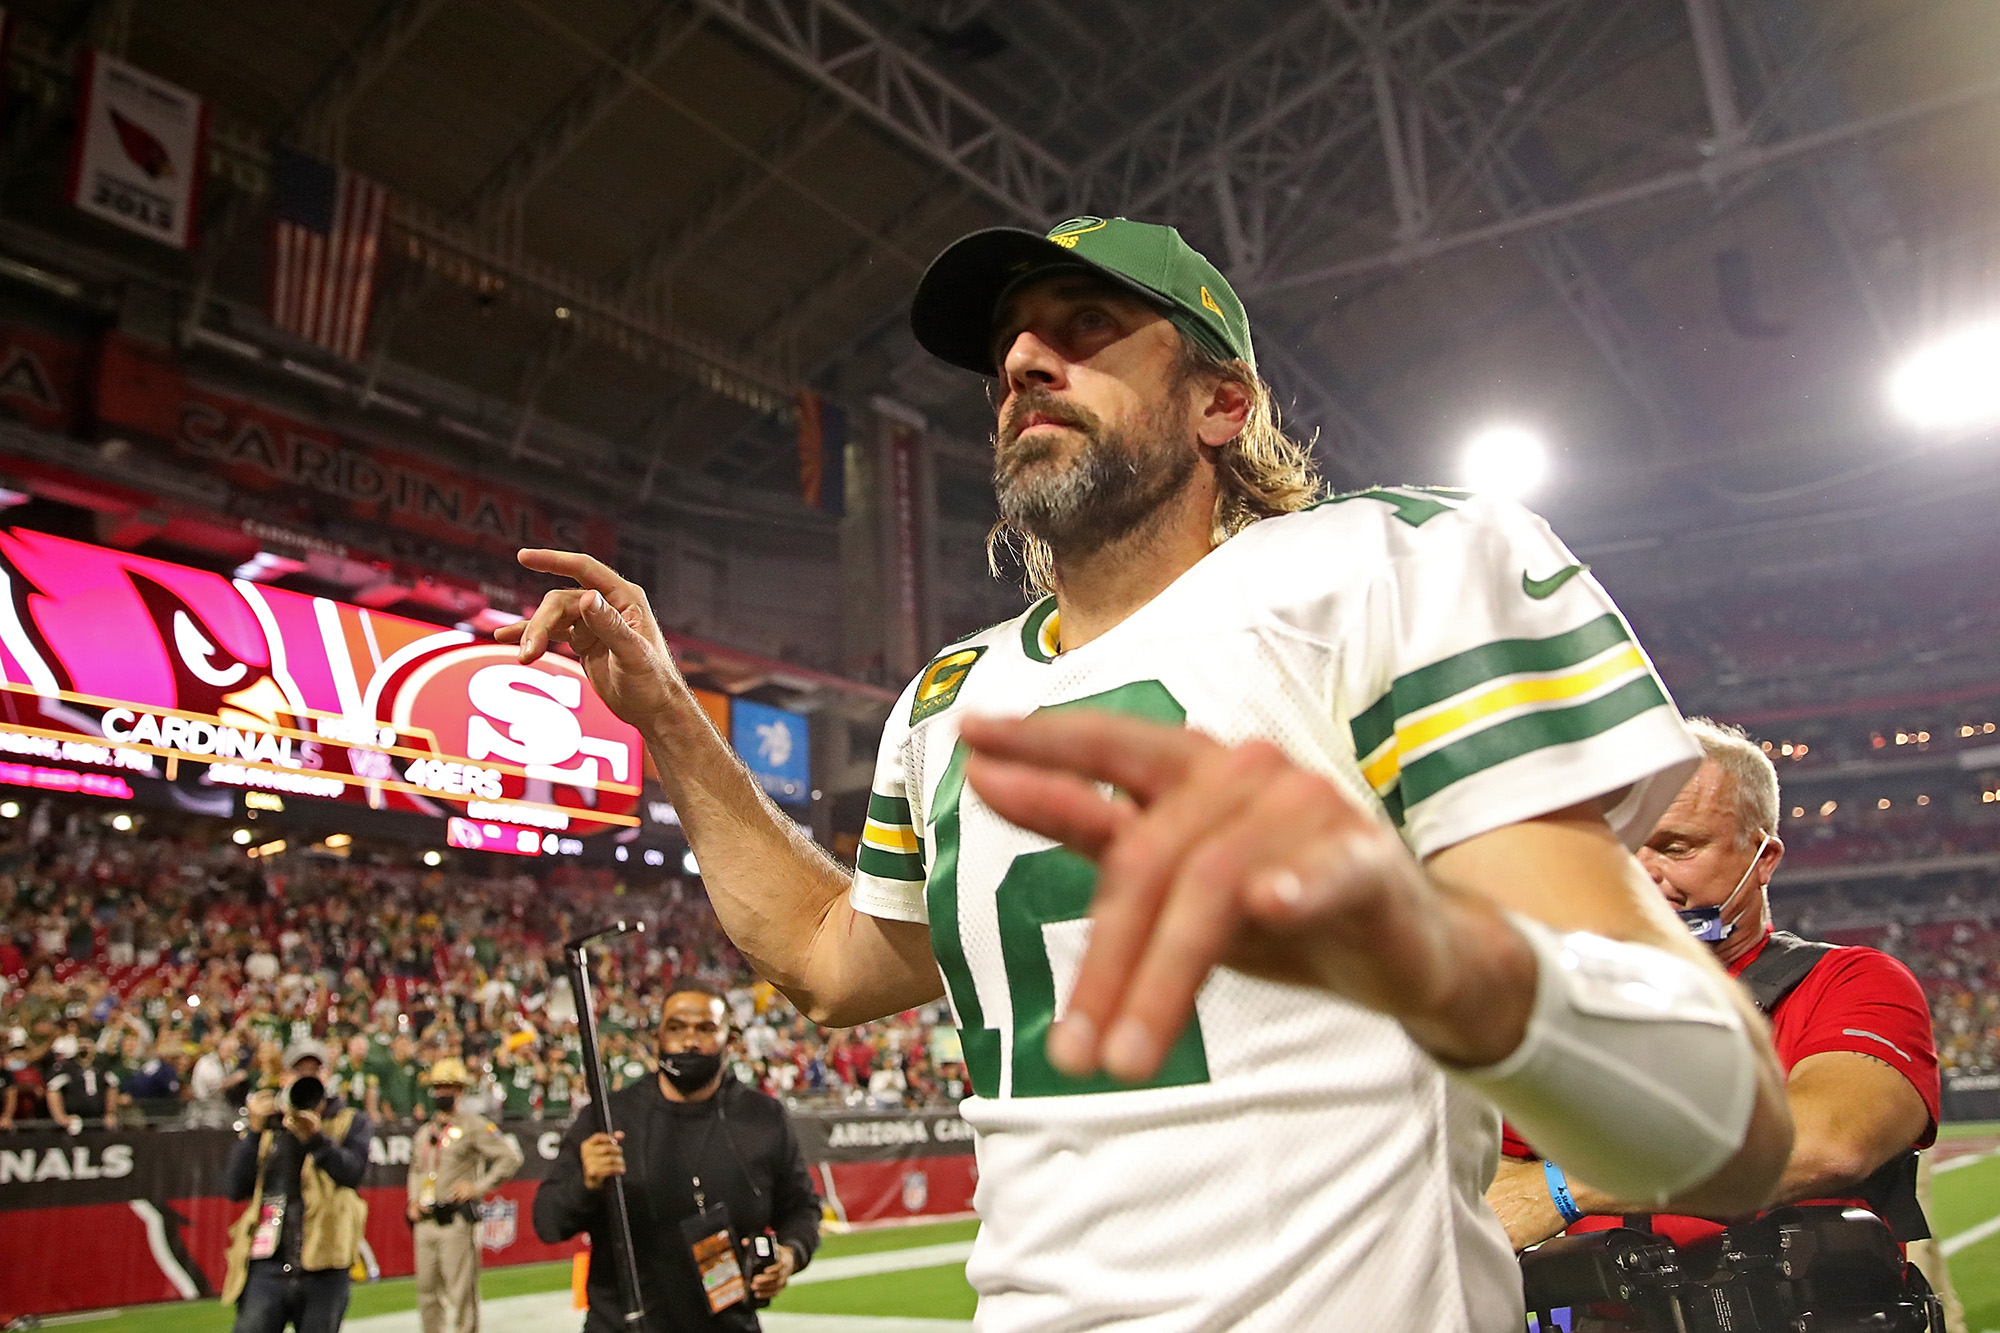 Aaron Rodgers situation to play for Packers after COVID-19 vaccine controversy